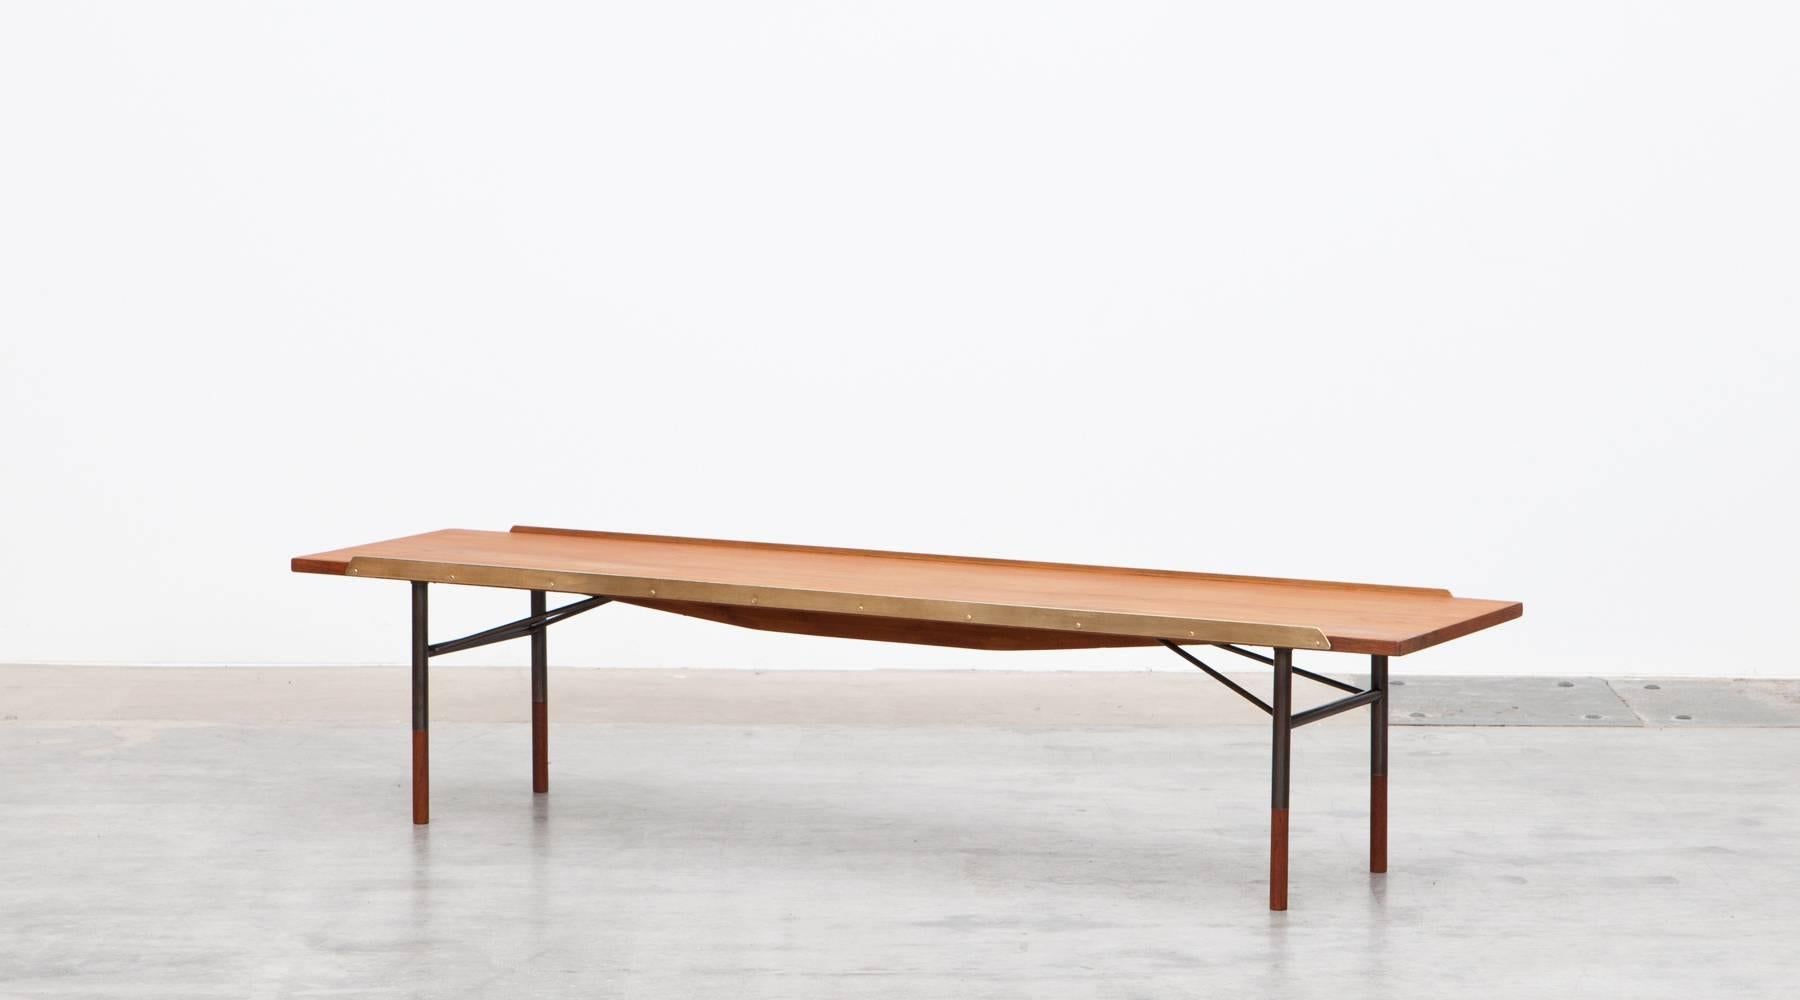 This design was conceived by Finn Juhl to be used as a bench and/or coffee table. The top surface is flanked by two solid brass strips that would have kept cushions in place but also guard against items on the surface falling off. The legs are